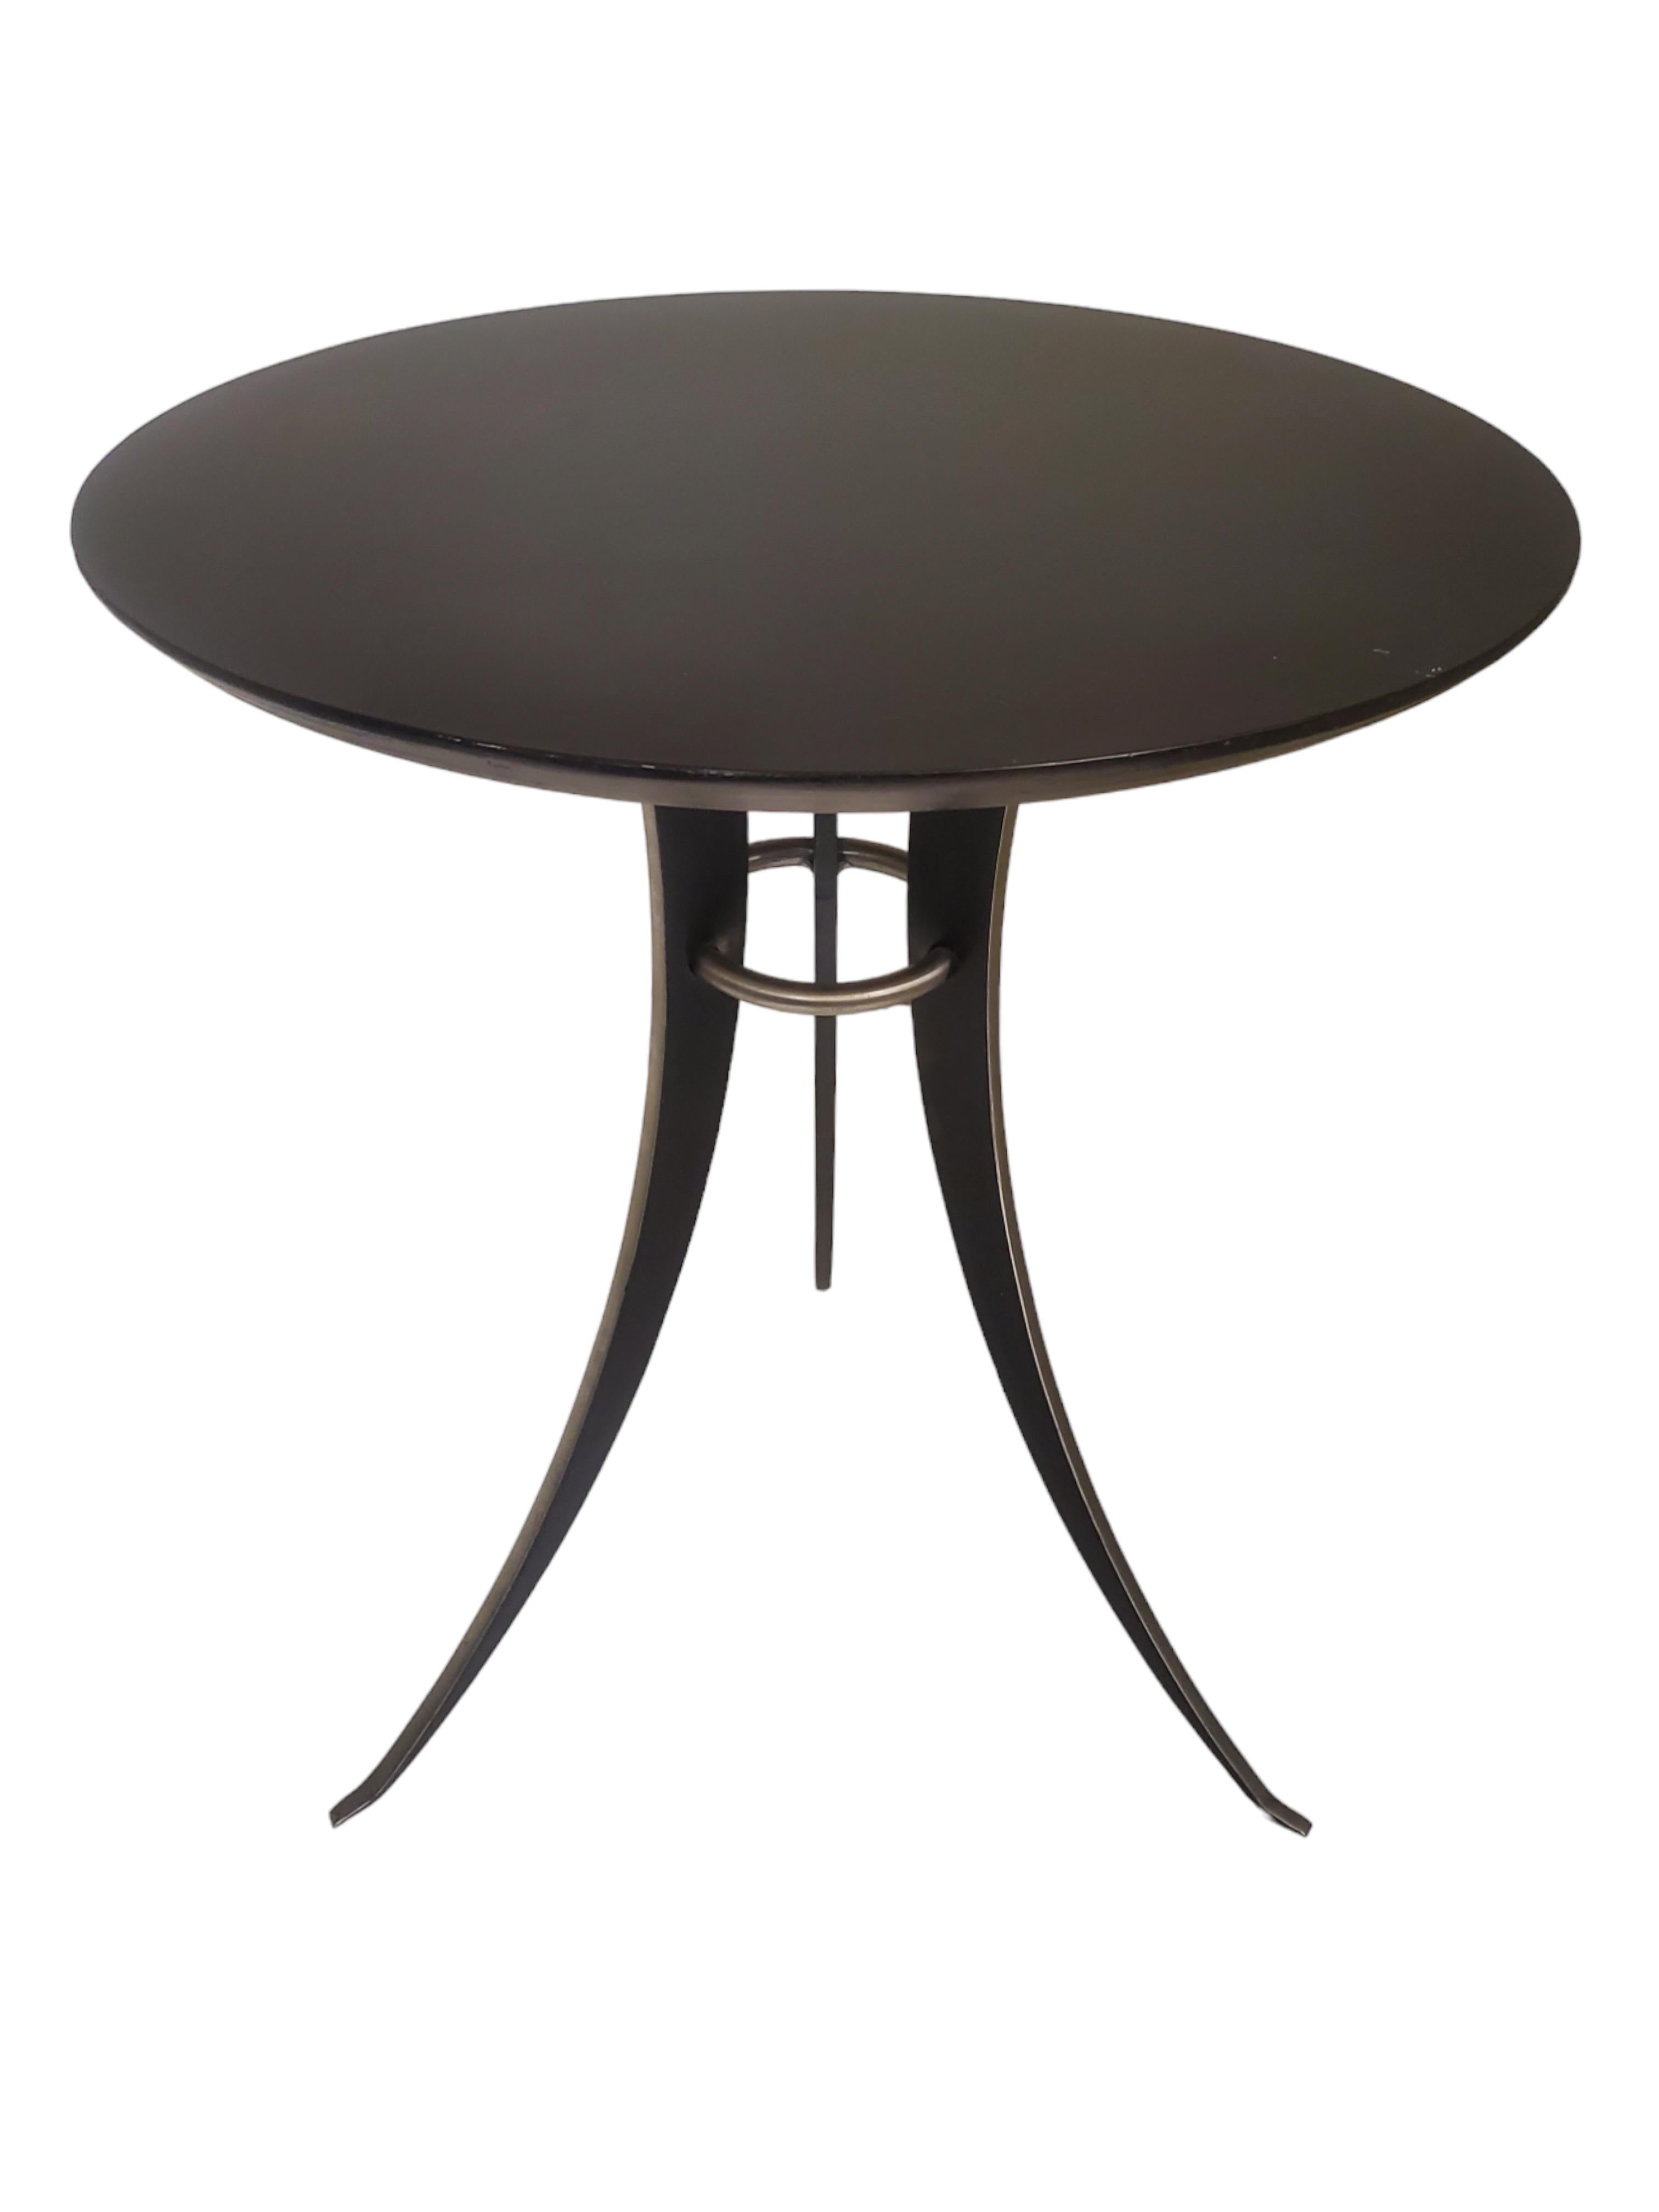 Minimalist Steel and Ebonized Wood Circular Table w/ tripodal legged base  In Good Condition For Sale In New York City, NY